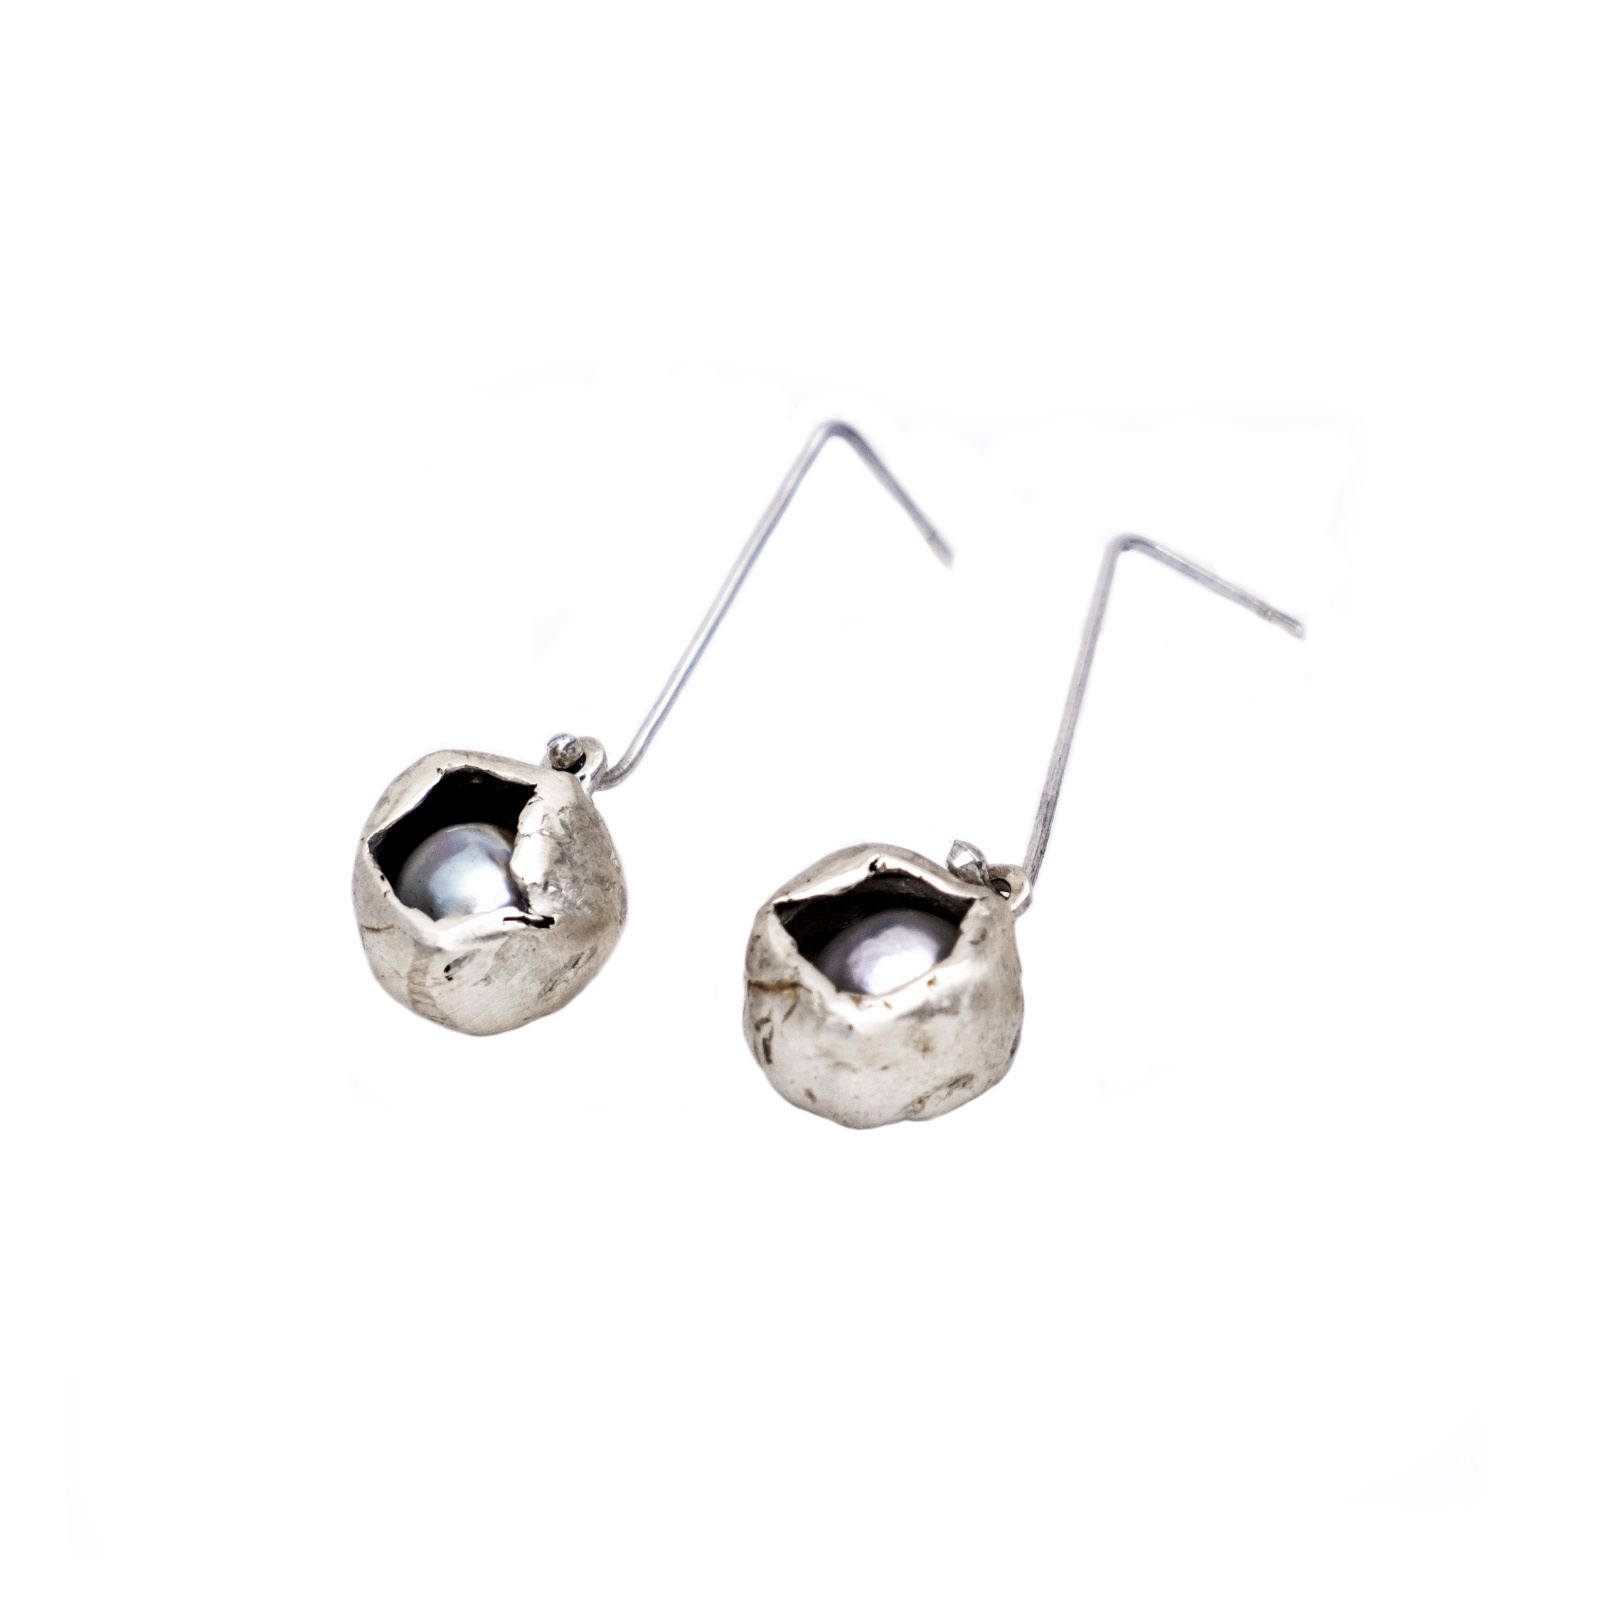 Earrings Perla che Danza Small - €215
Free Shipping 

Details

Pearls
925 Sterling Silver
High Polished Finish
Nickel-free
Handmade


